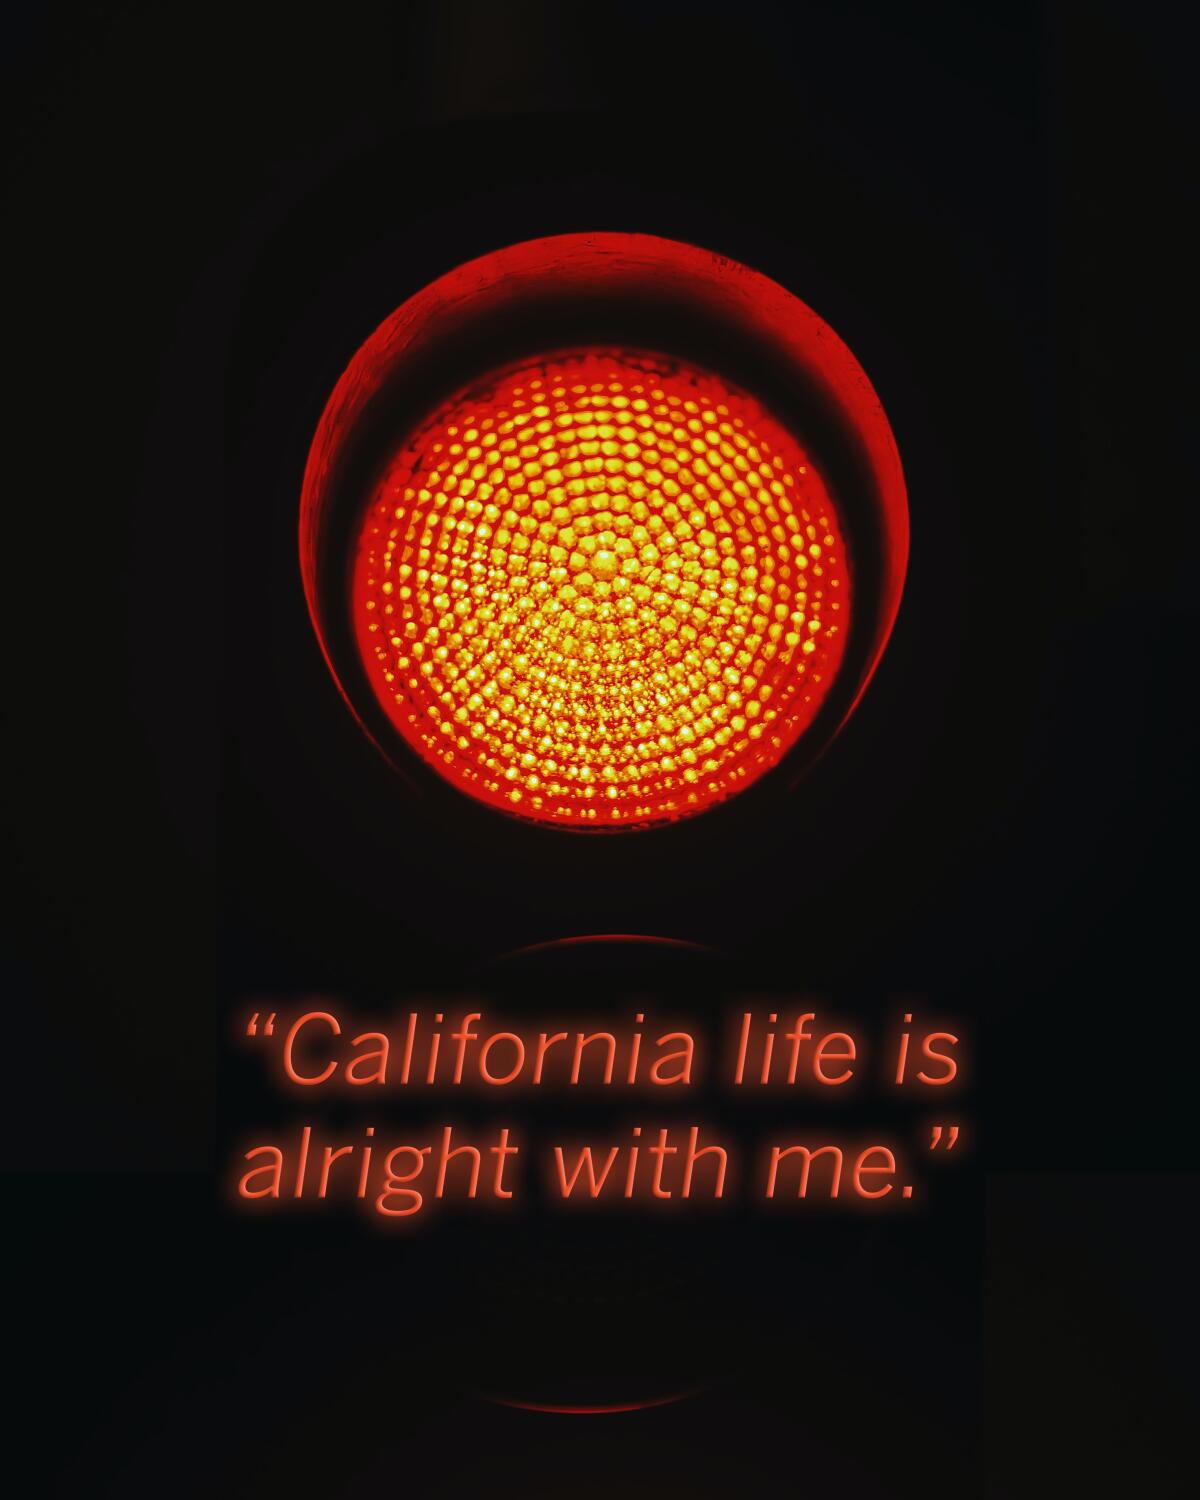 Lyric "California Life is alright with me" from the Avalanches “Running Red Lights” displayed with photo of a stoplight.